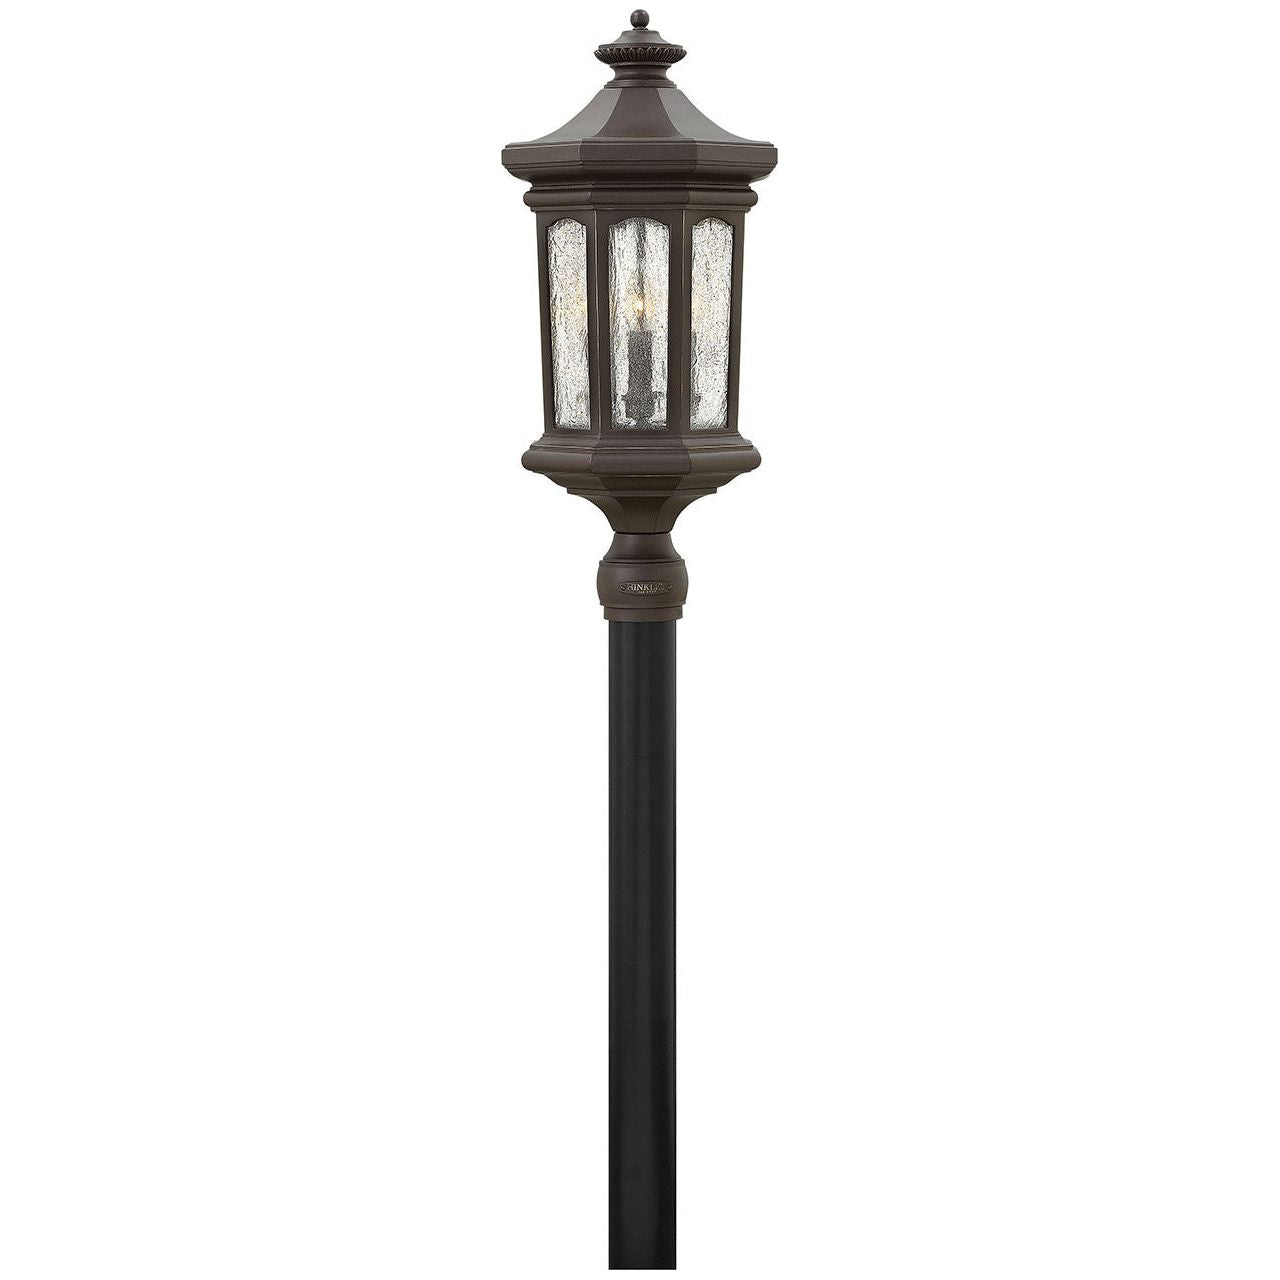 Hinkley Canada - 1601OZ-LV - LED Post Top or Pier Mount Lantern - Raley - Oil Rubbed Bronze